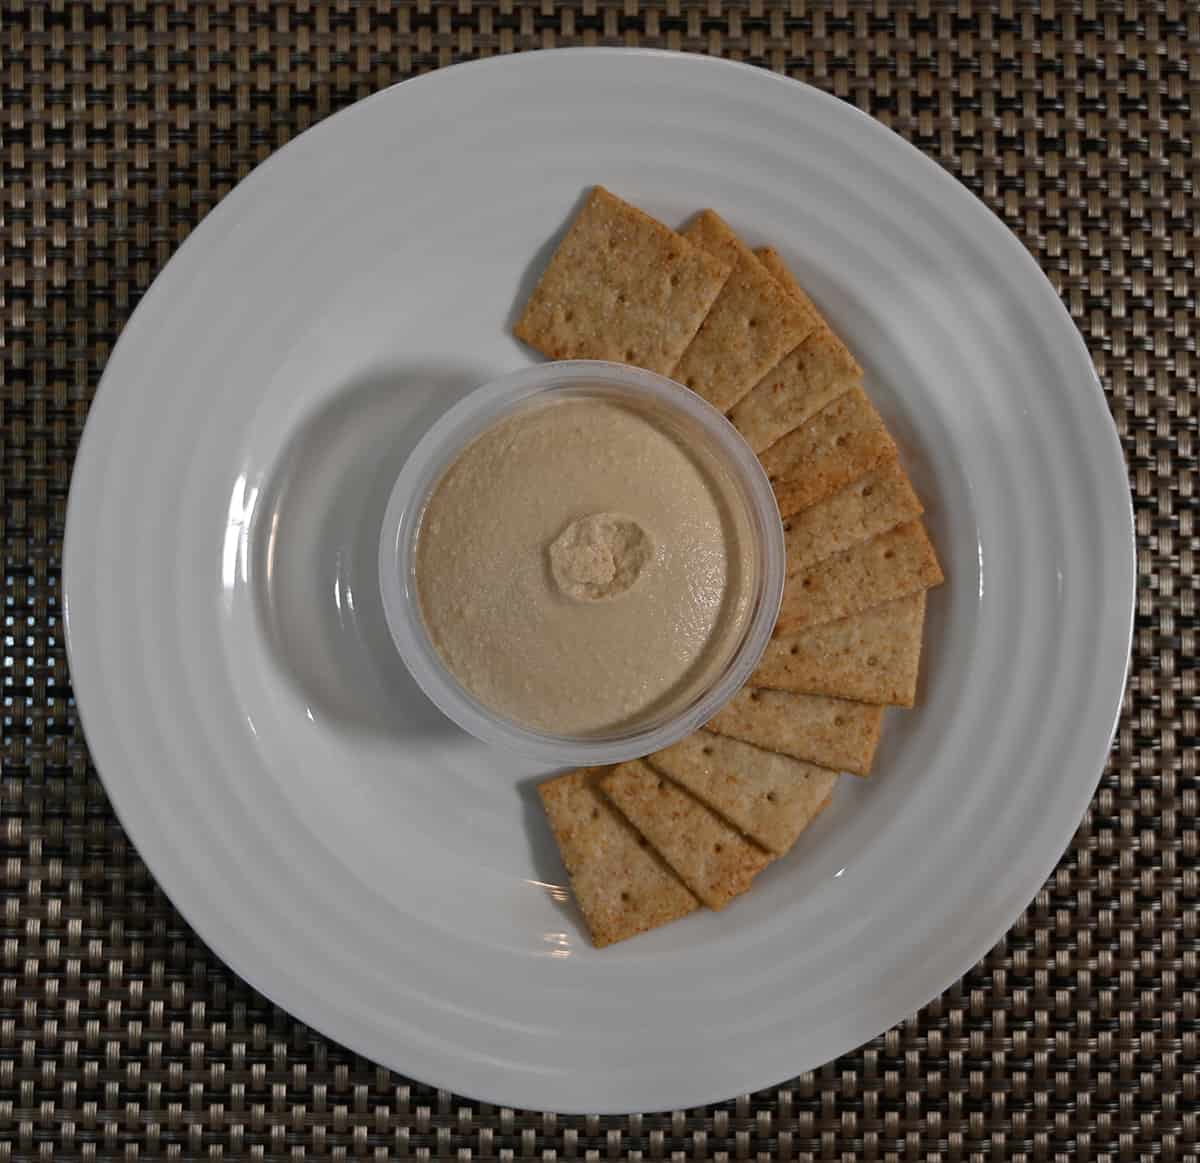 Top down image of a plate of crackers with a plastic cup of hummus in the middle of the crackers.